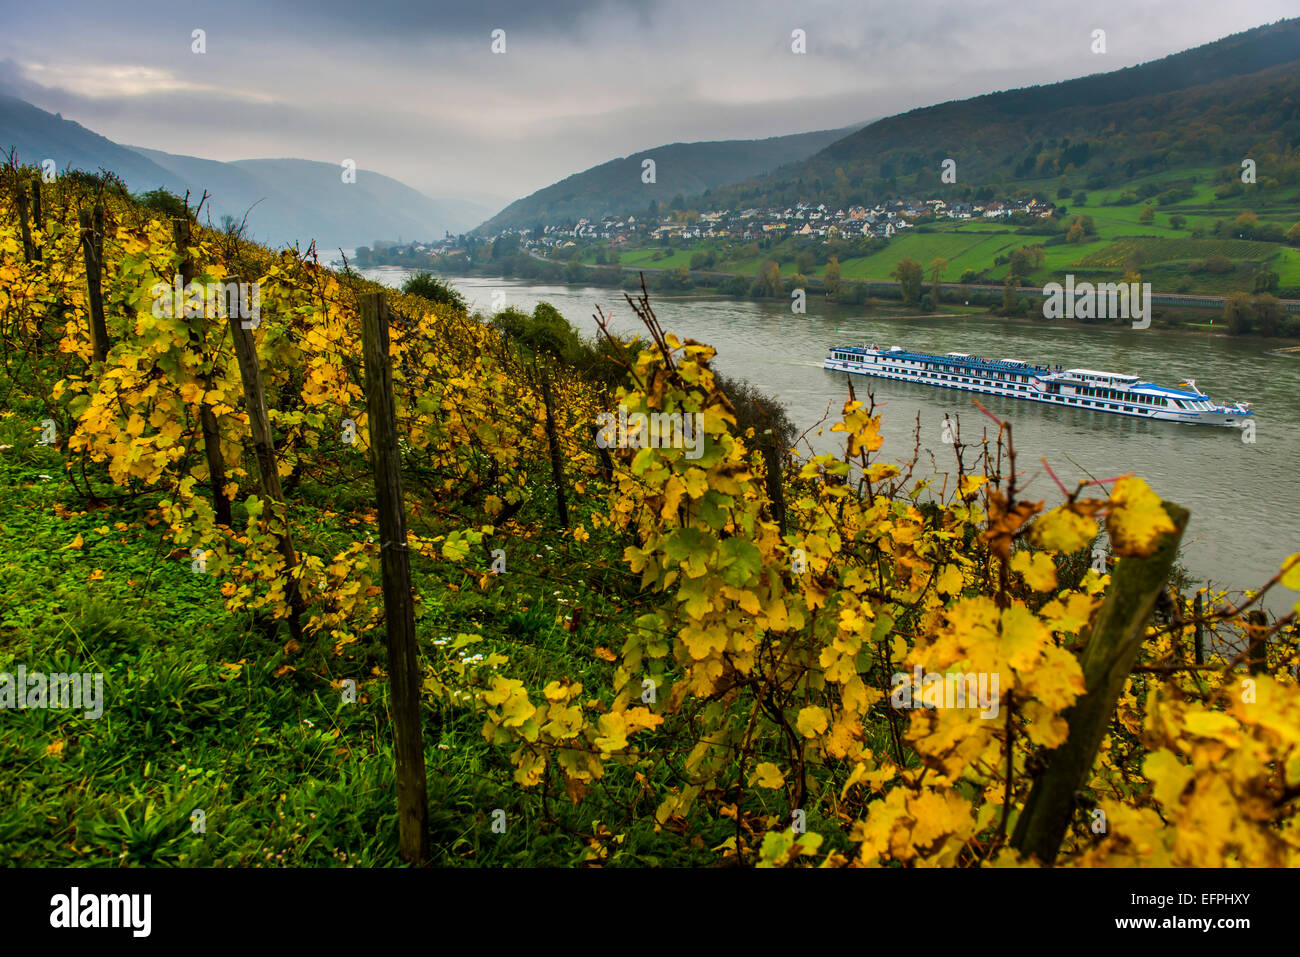 Fall leaves in the vineyards and a cruise ship on the Rhine River, Assmannshausen, Rhine valley, Rhineland-Palatinate, Germany Stock Photo